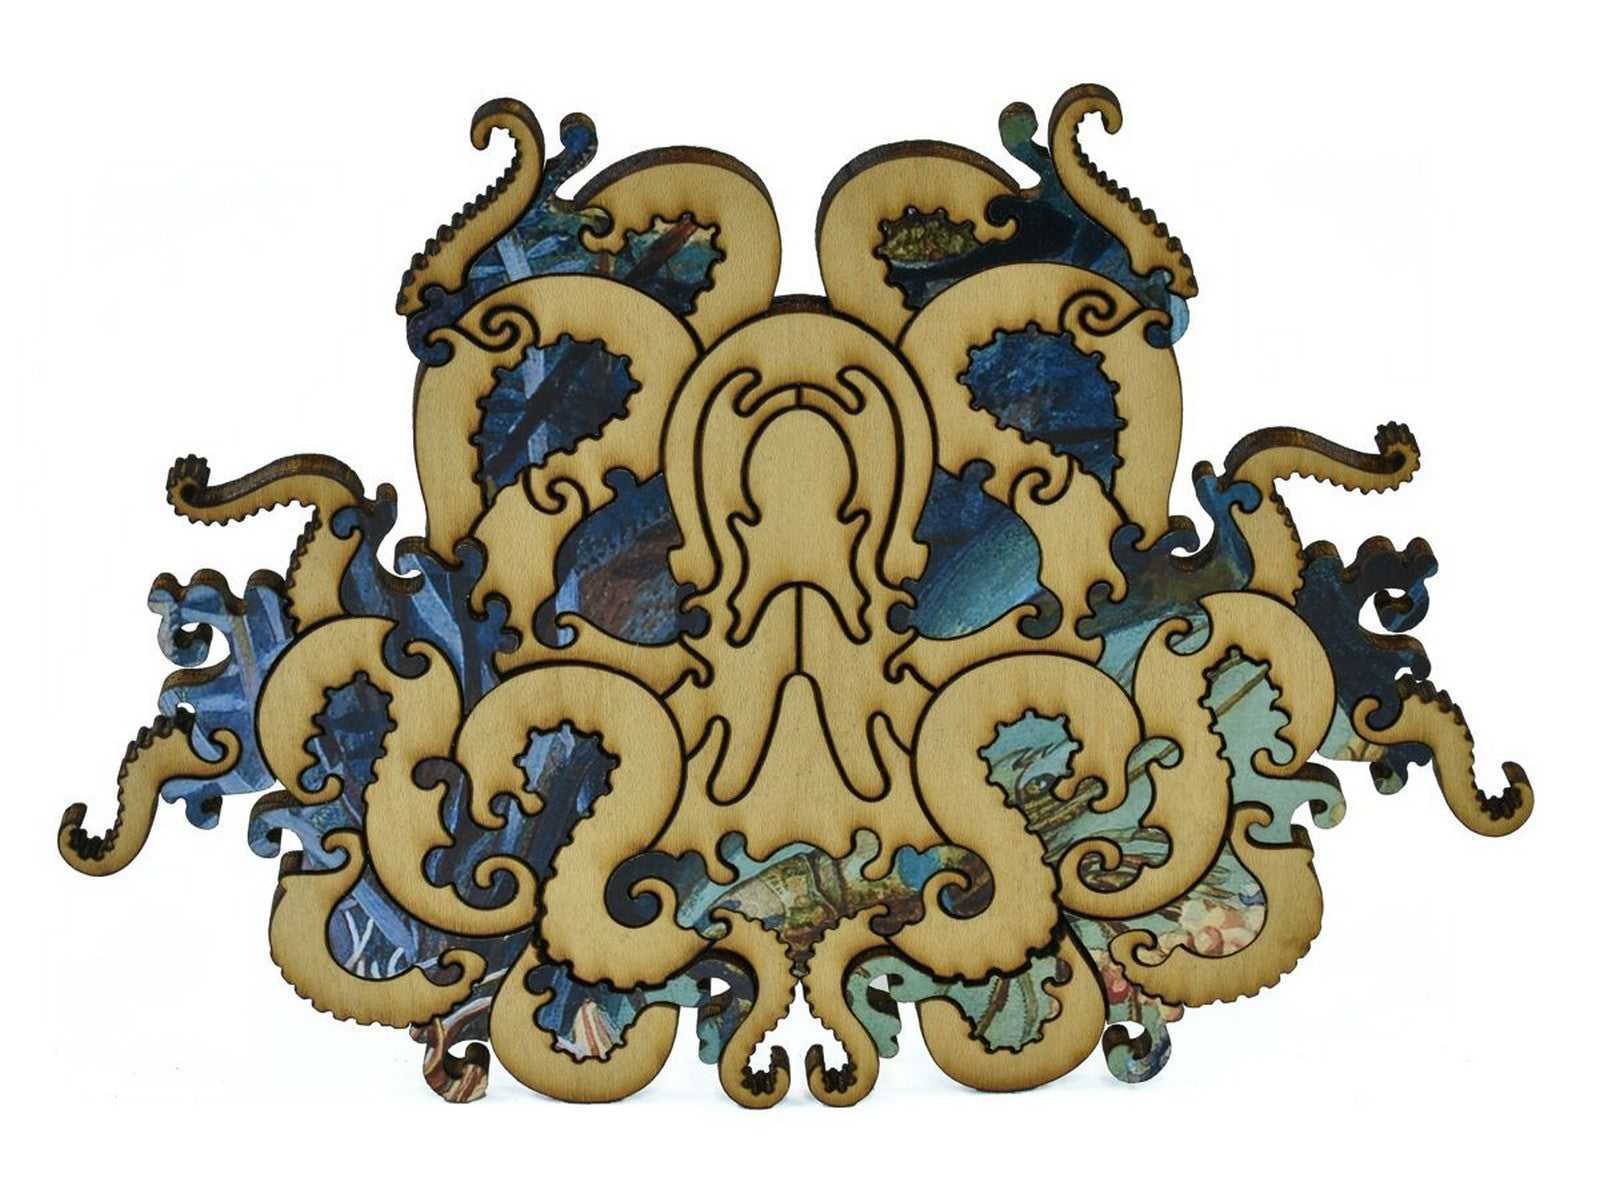 A closeup of pieces in the shape of a large octopus.